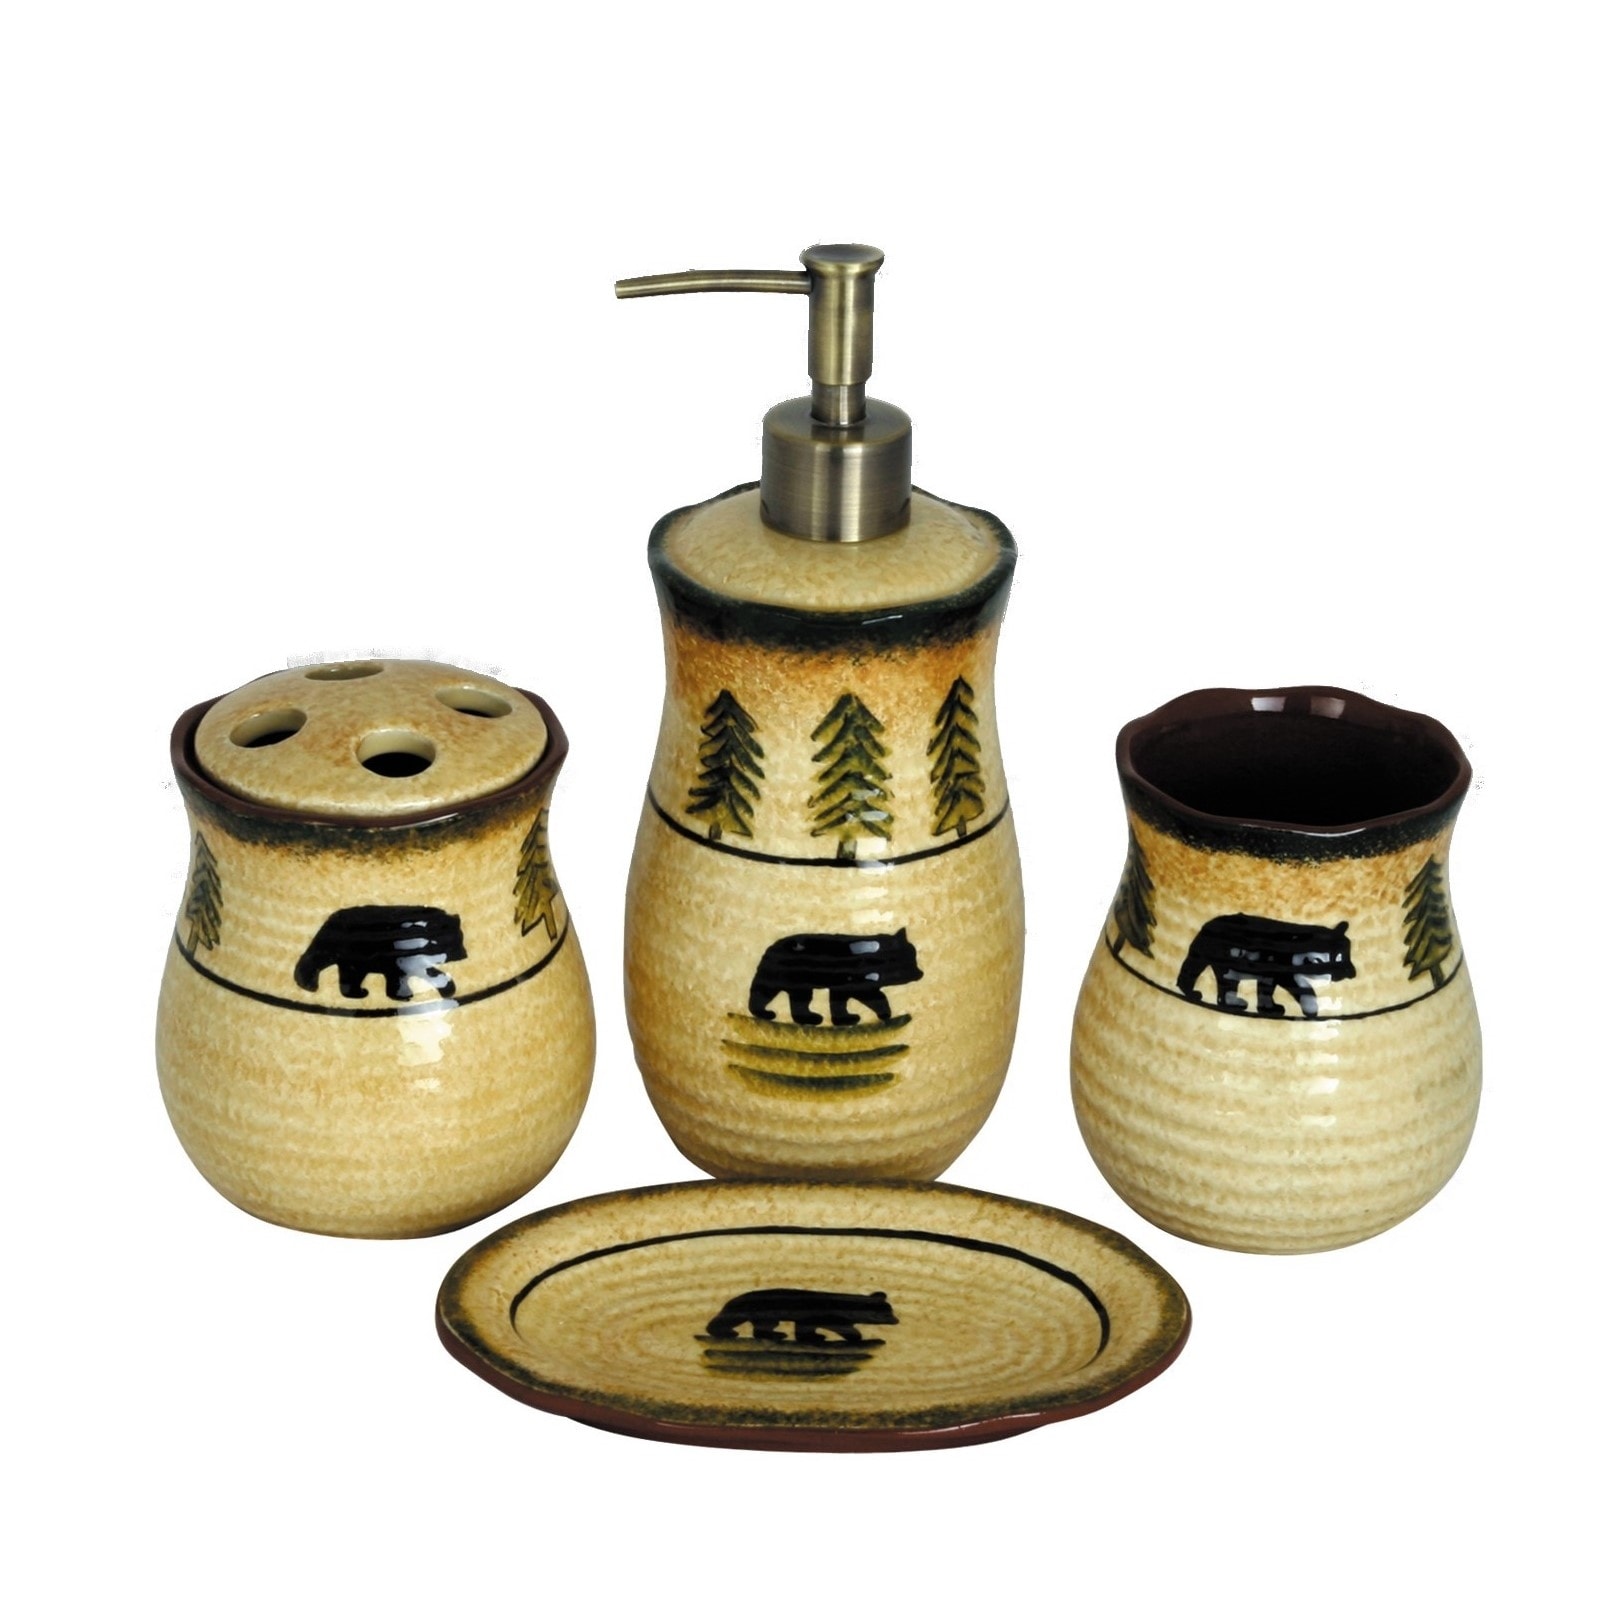 Paseo Road by HiEnd Accents Rustic Bear Ceramic Forest Bathroom Countertop Set, 4PC